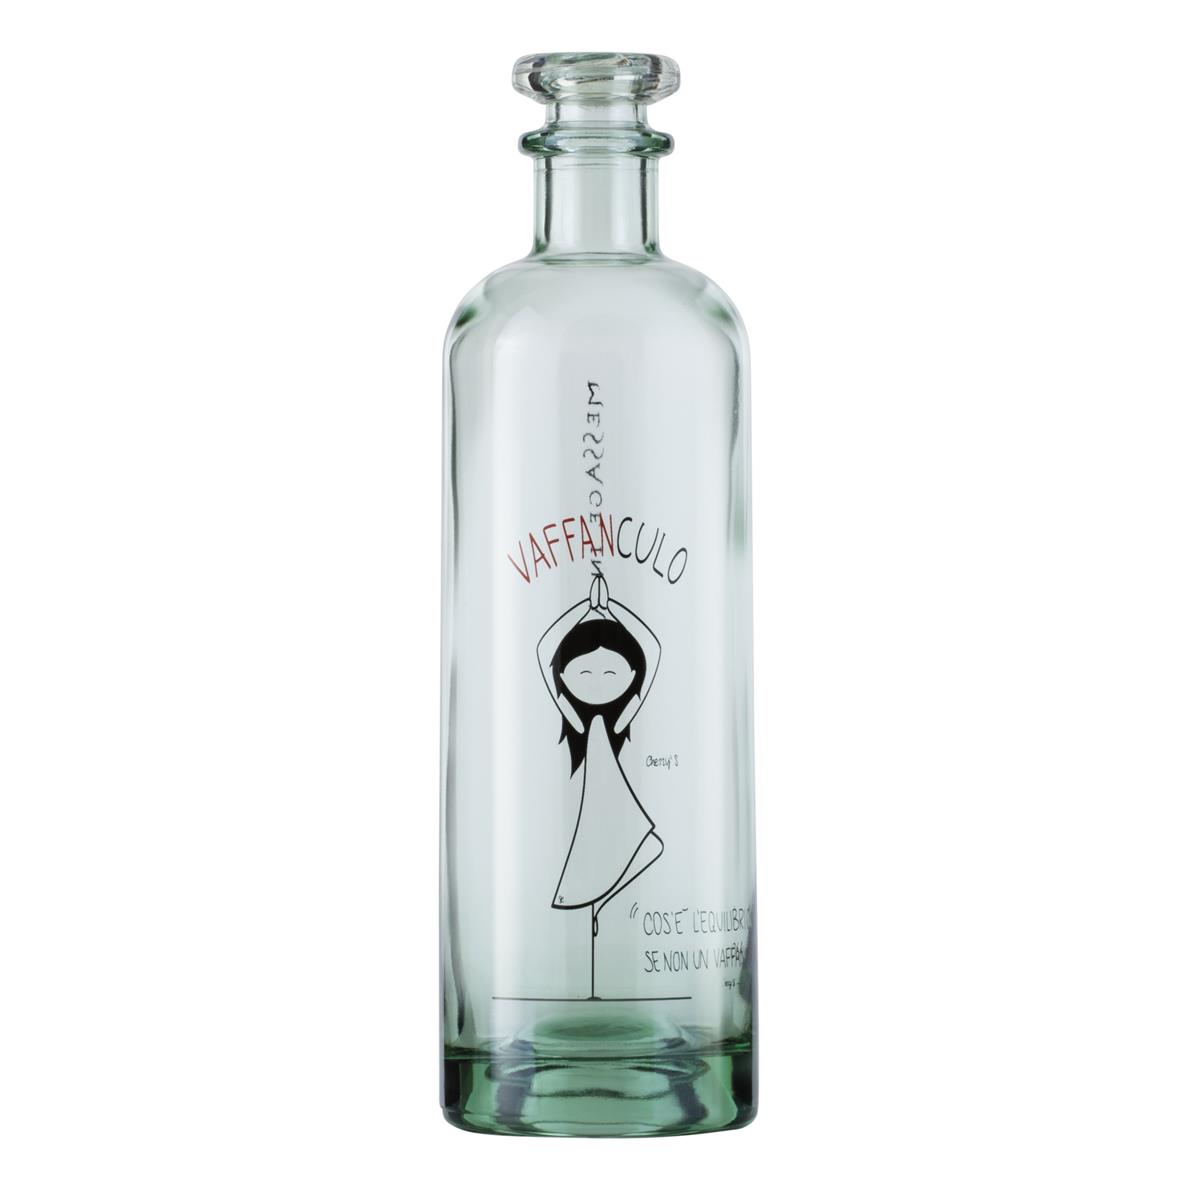 photo Wild - Message in a Bottle - Cherry'S | Vaffanyoga 700 ml